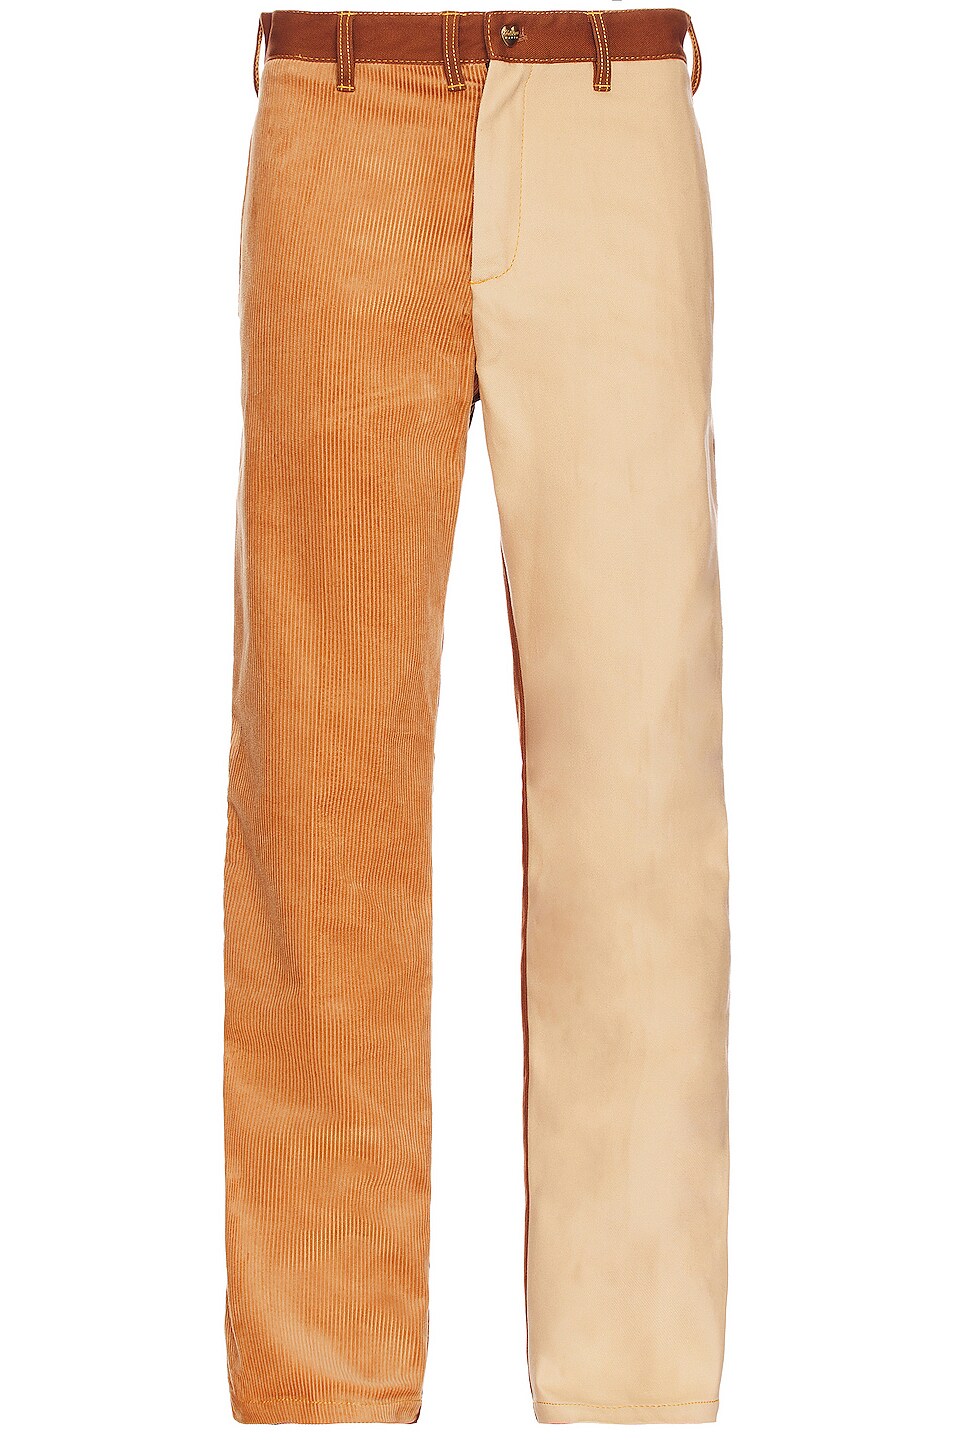 Image 1 of Marni X Carhartt Patchwork Pant In Tobacco in Tobacco